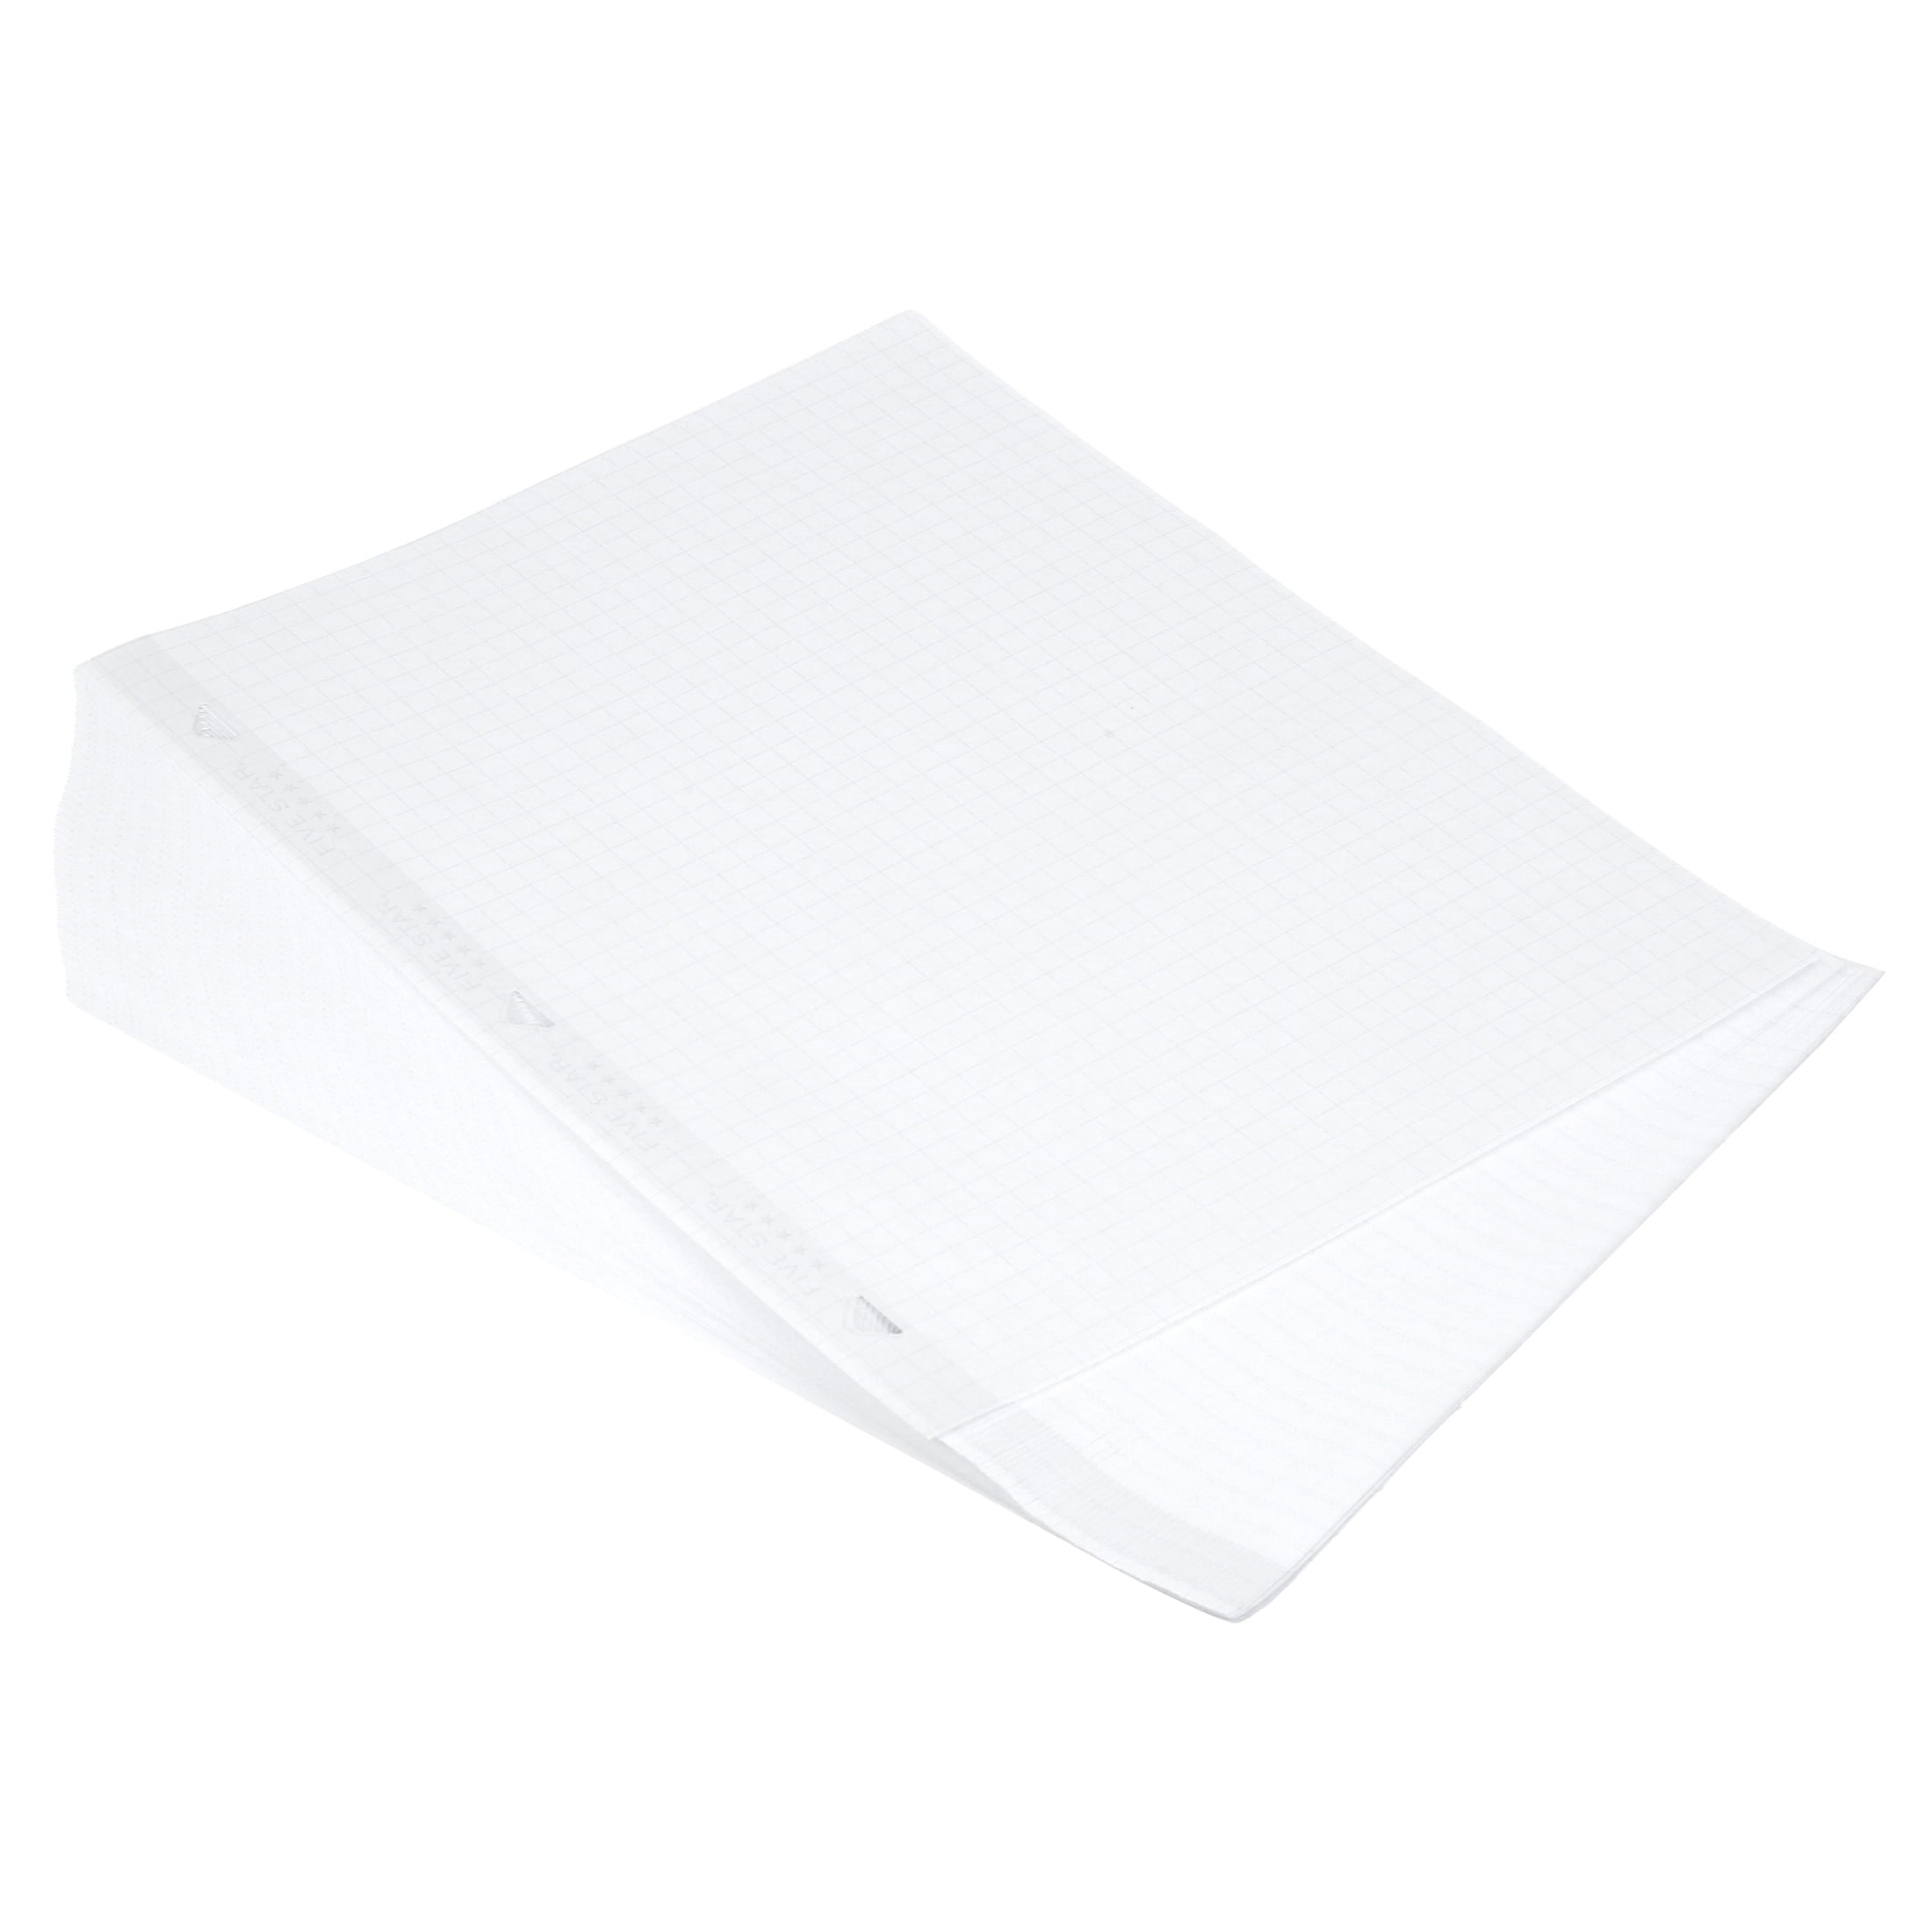 Five Star Filler Paper, Graph Ruled Paper, 100 Sheets/Pack, 11 x 8-1/2,  Reinforced, Loose Leaf, White, 3 Pack (73187)